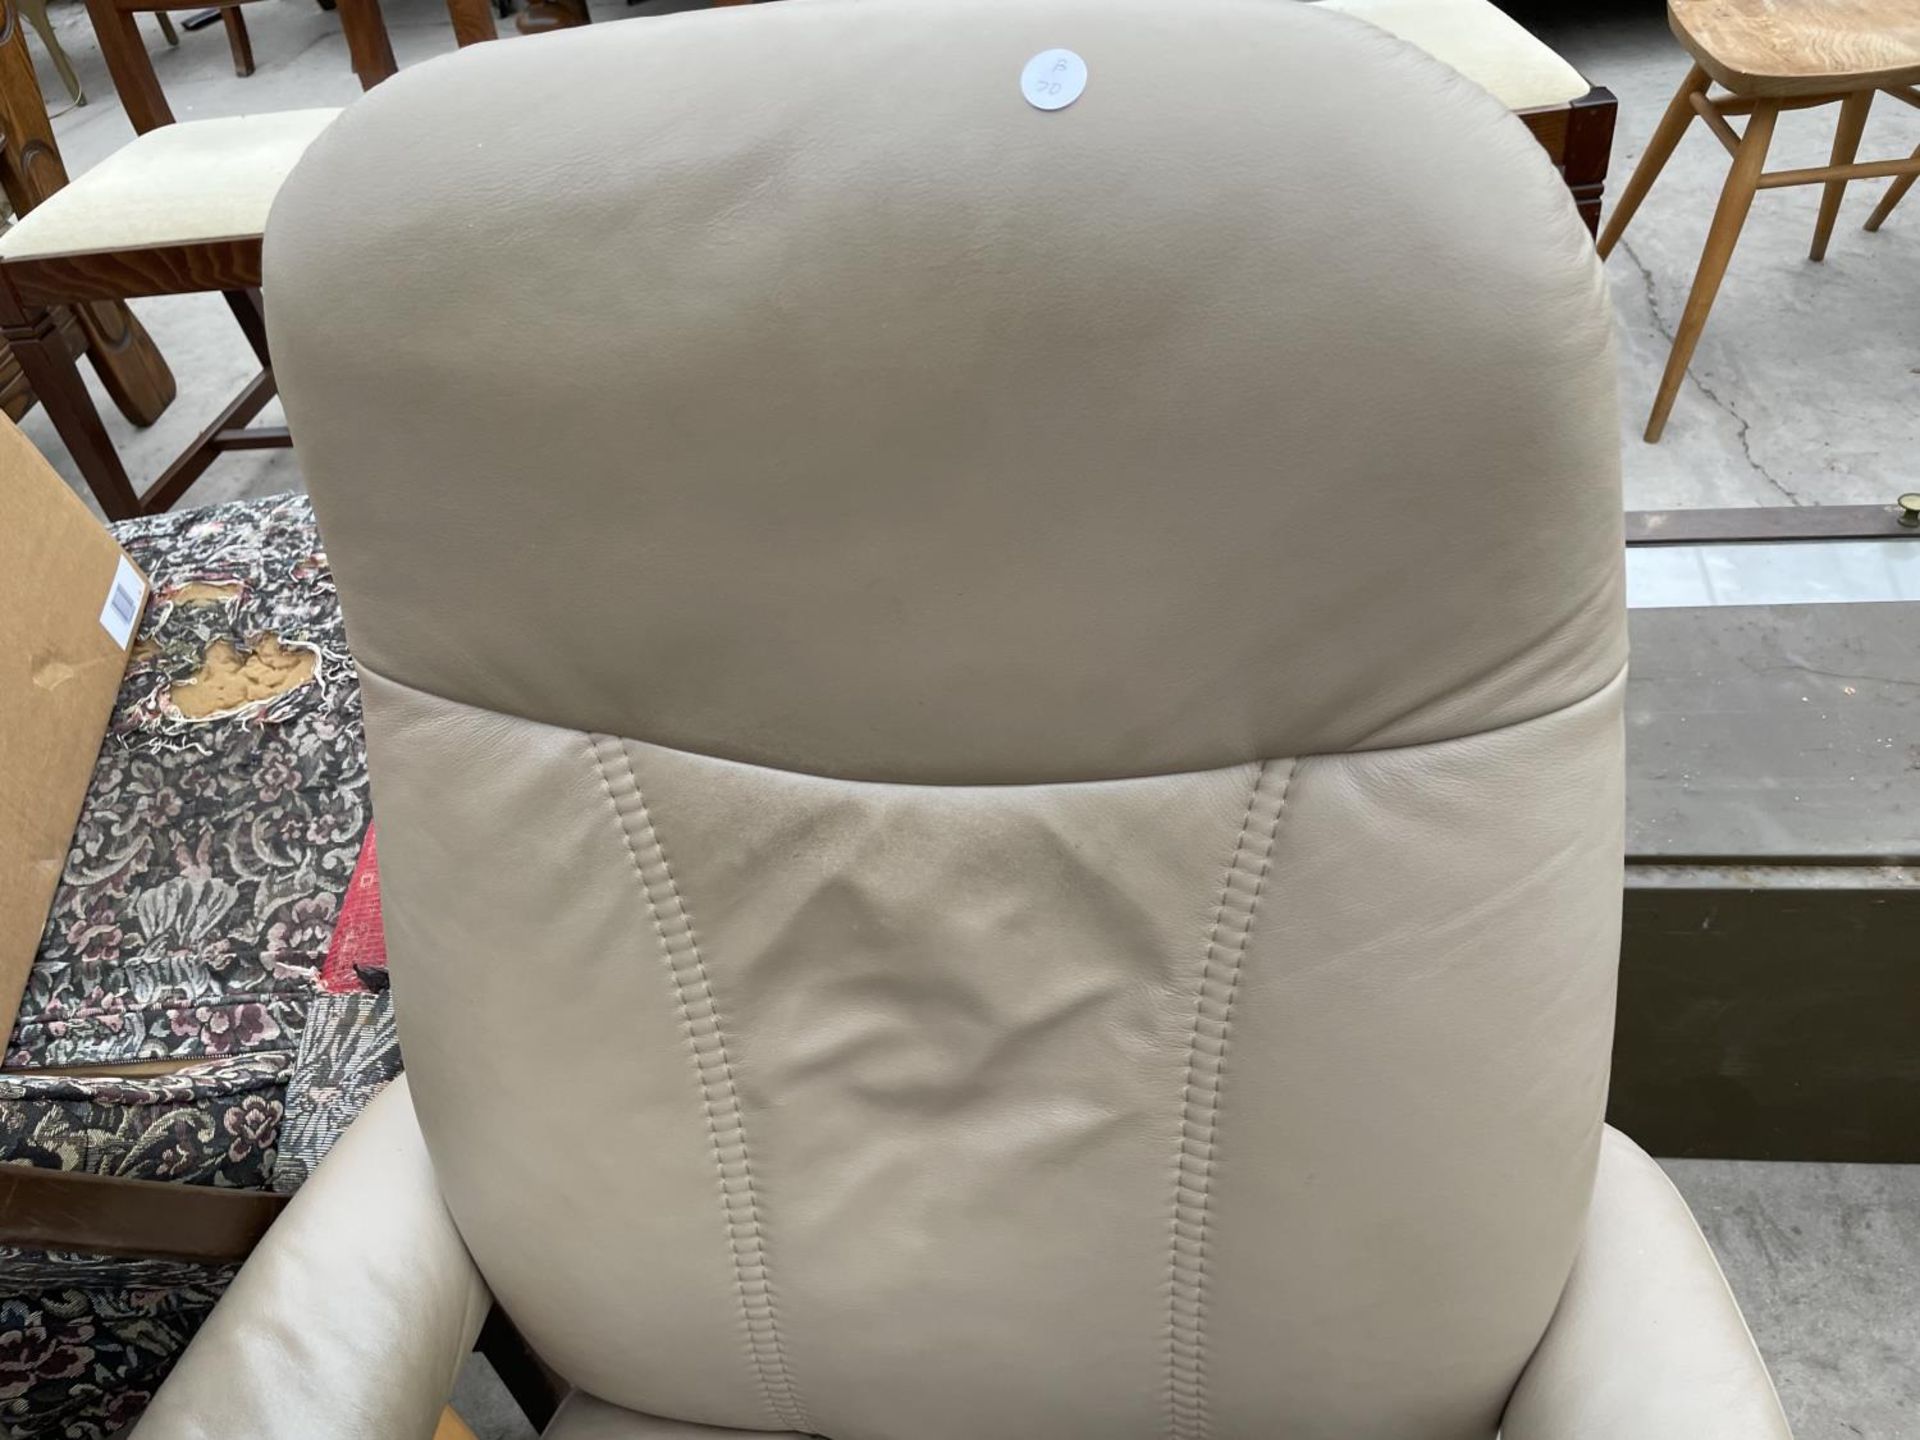 A STRESSLESS EKORNES RECLINER CHAIR COMPLETE WITH STOOL - Image 3 of 8